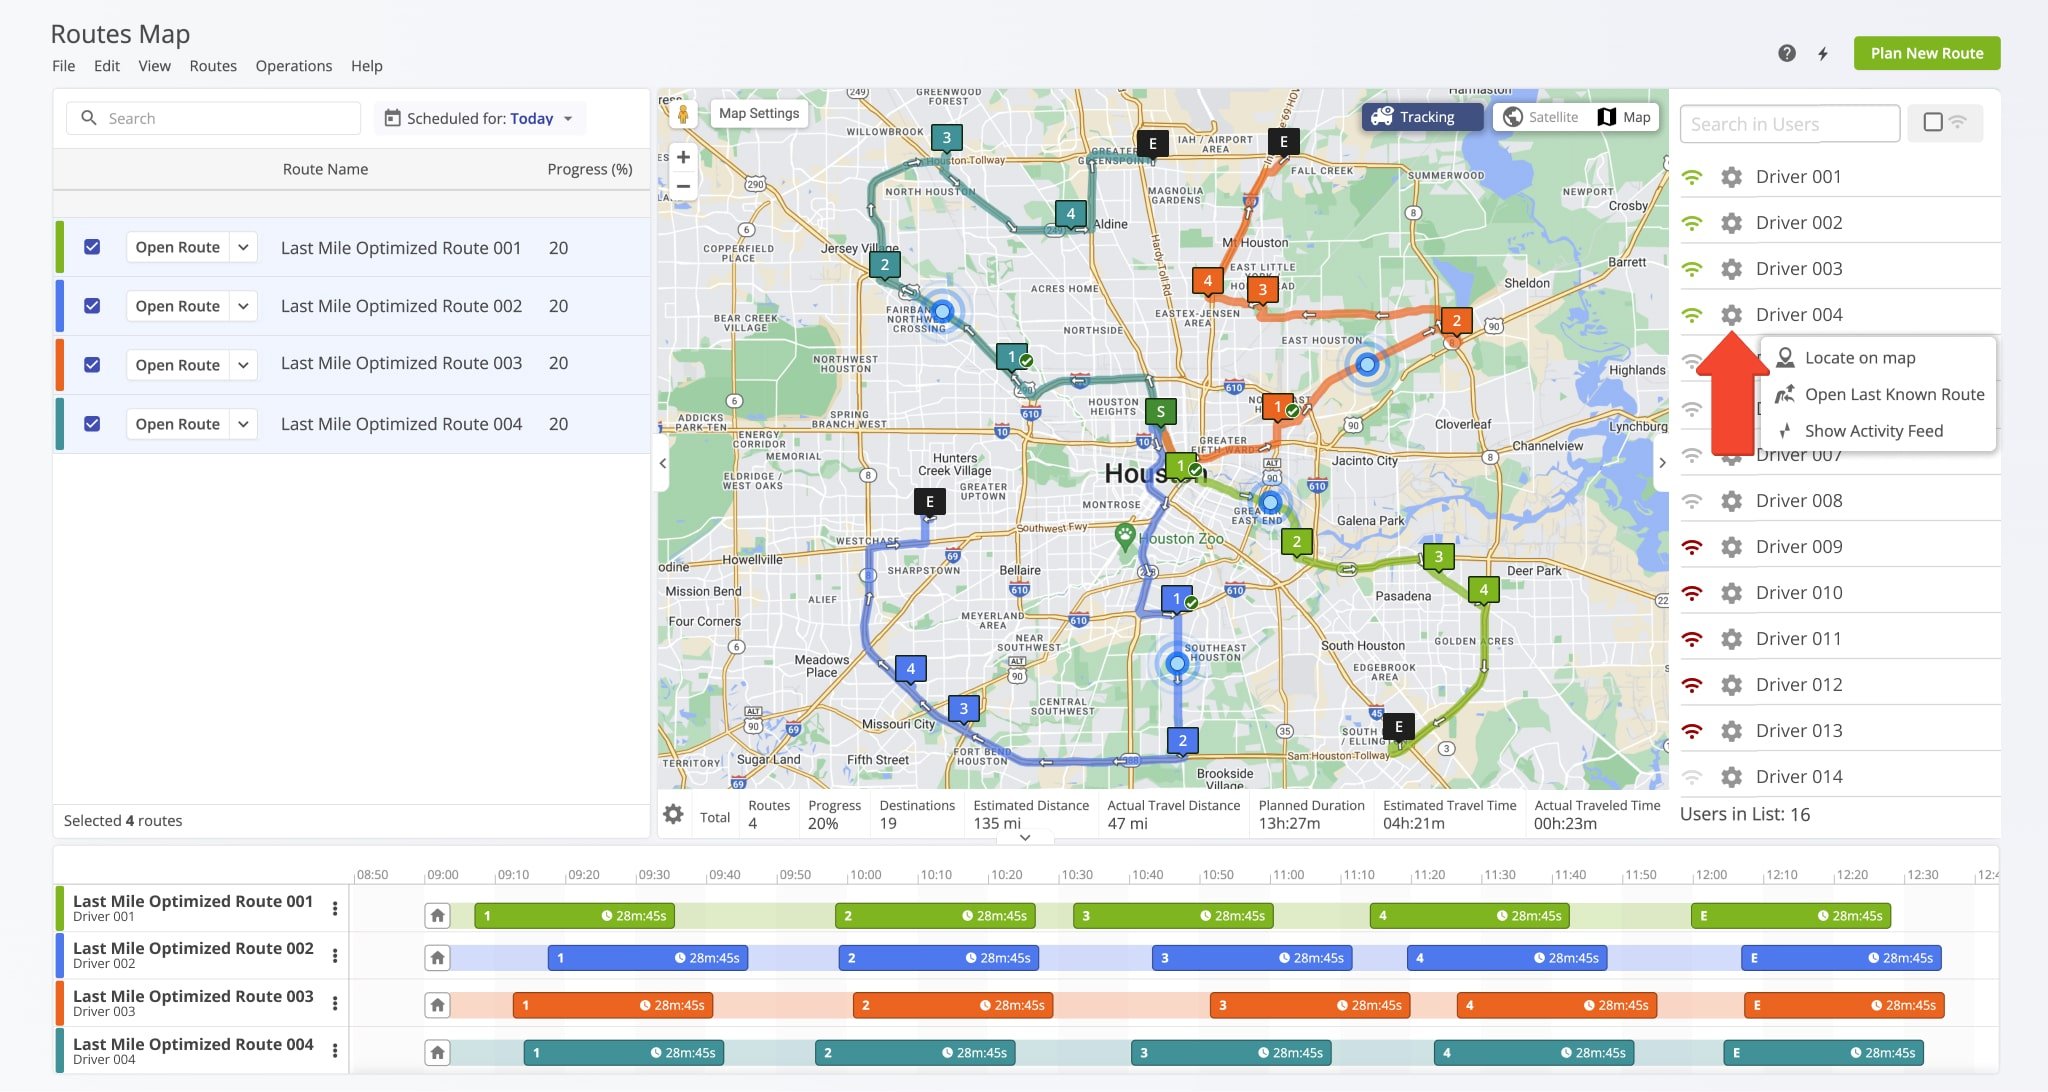 When tracking multiple drivers or vehicles on the Routes Map, you can open the list of users and click the Gear Icon to locate users on the map, open each user's last known route or open the Activity Feed for that user.